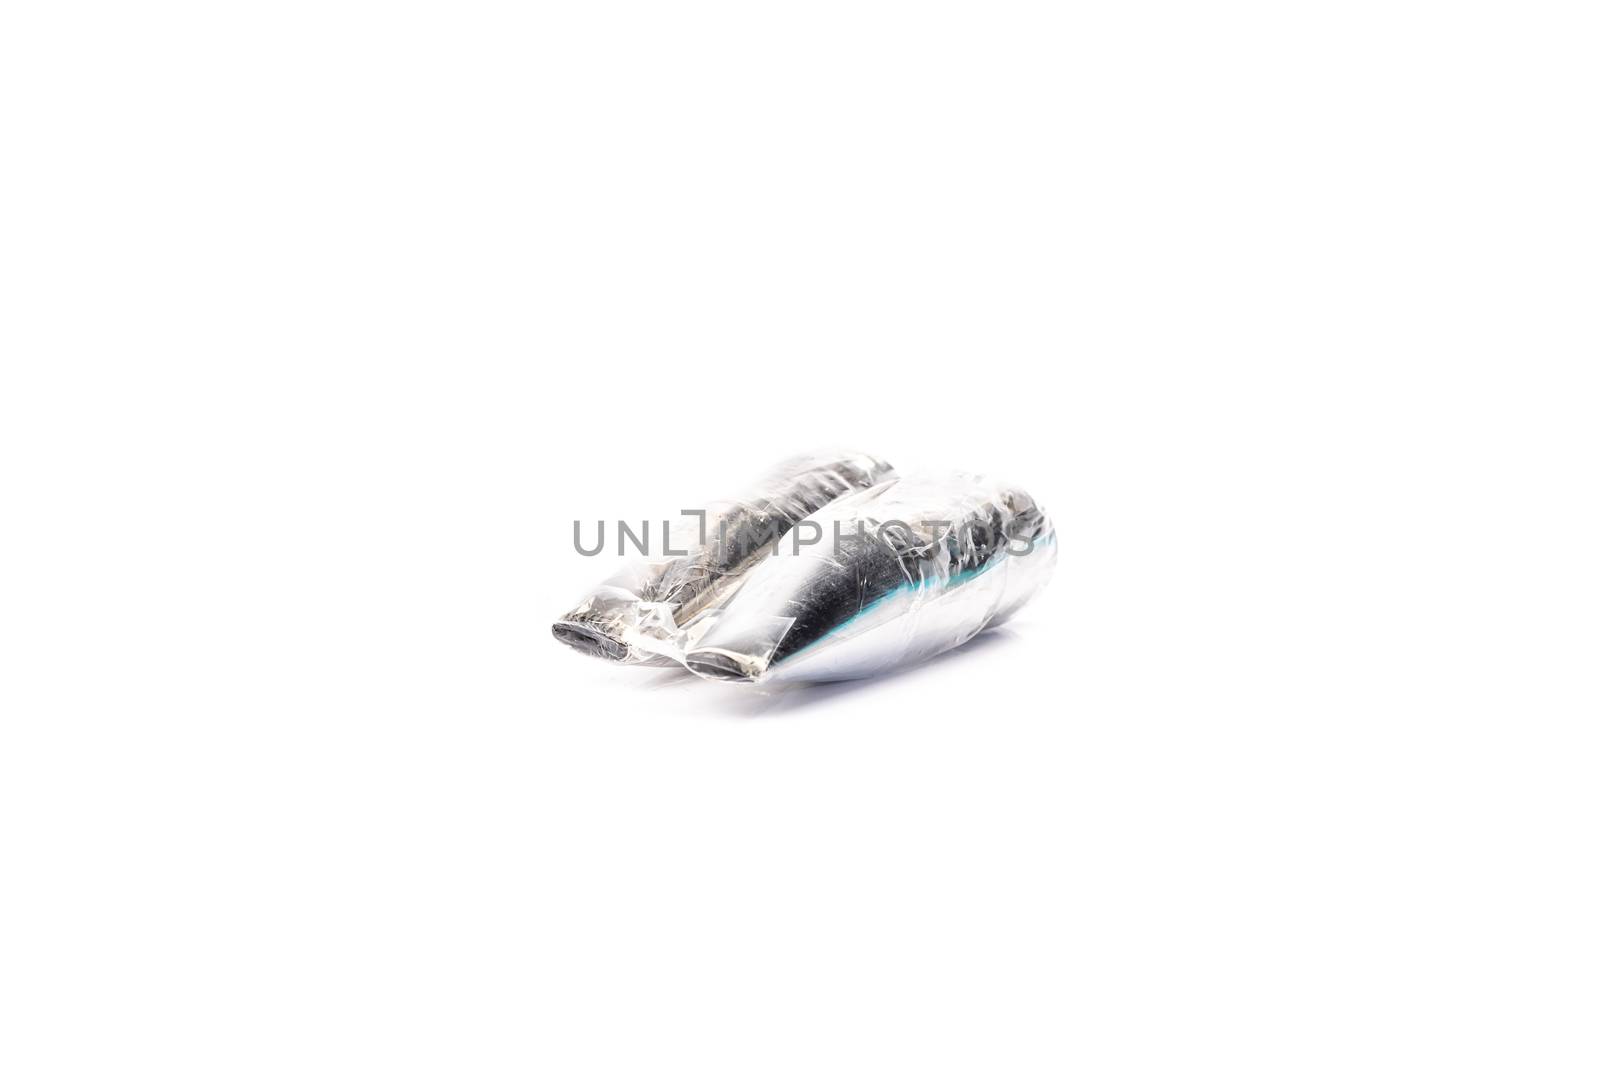 kitchen socket on white background in studio - Cake Decorating - Stainless steel